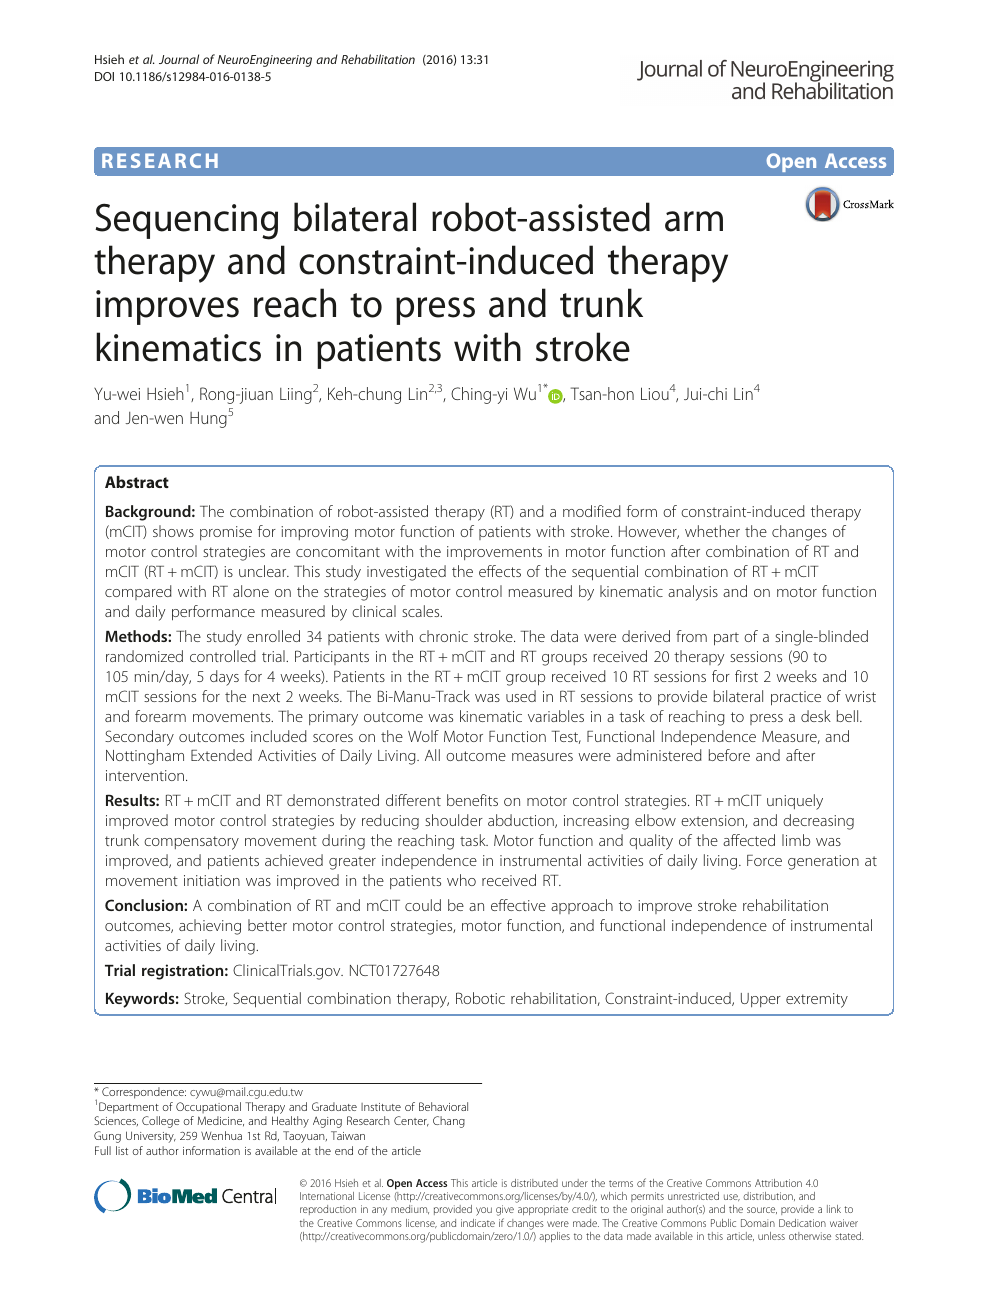 Sequencing Bilateral Robot Assisted Arm Therapy And Constraint